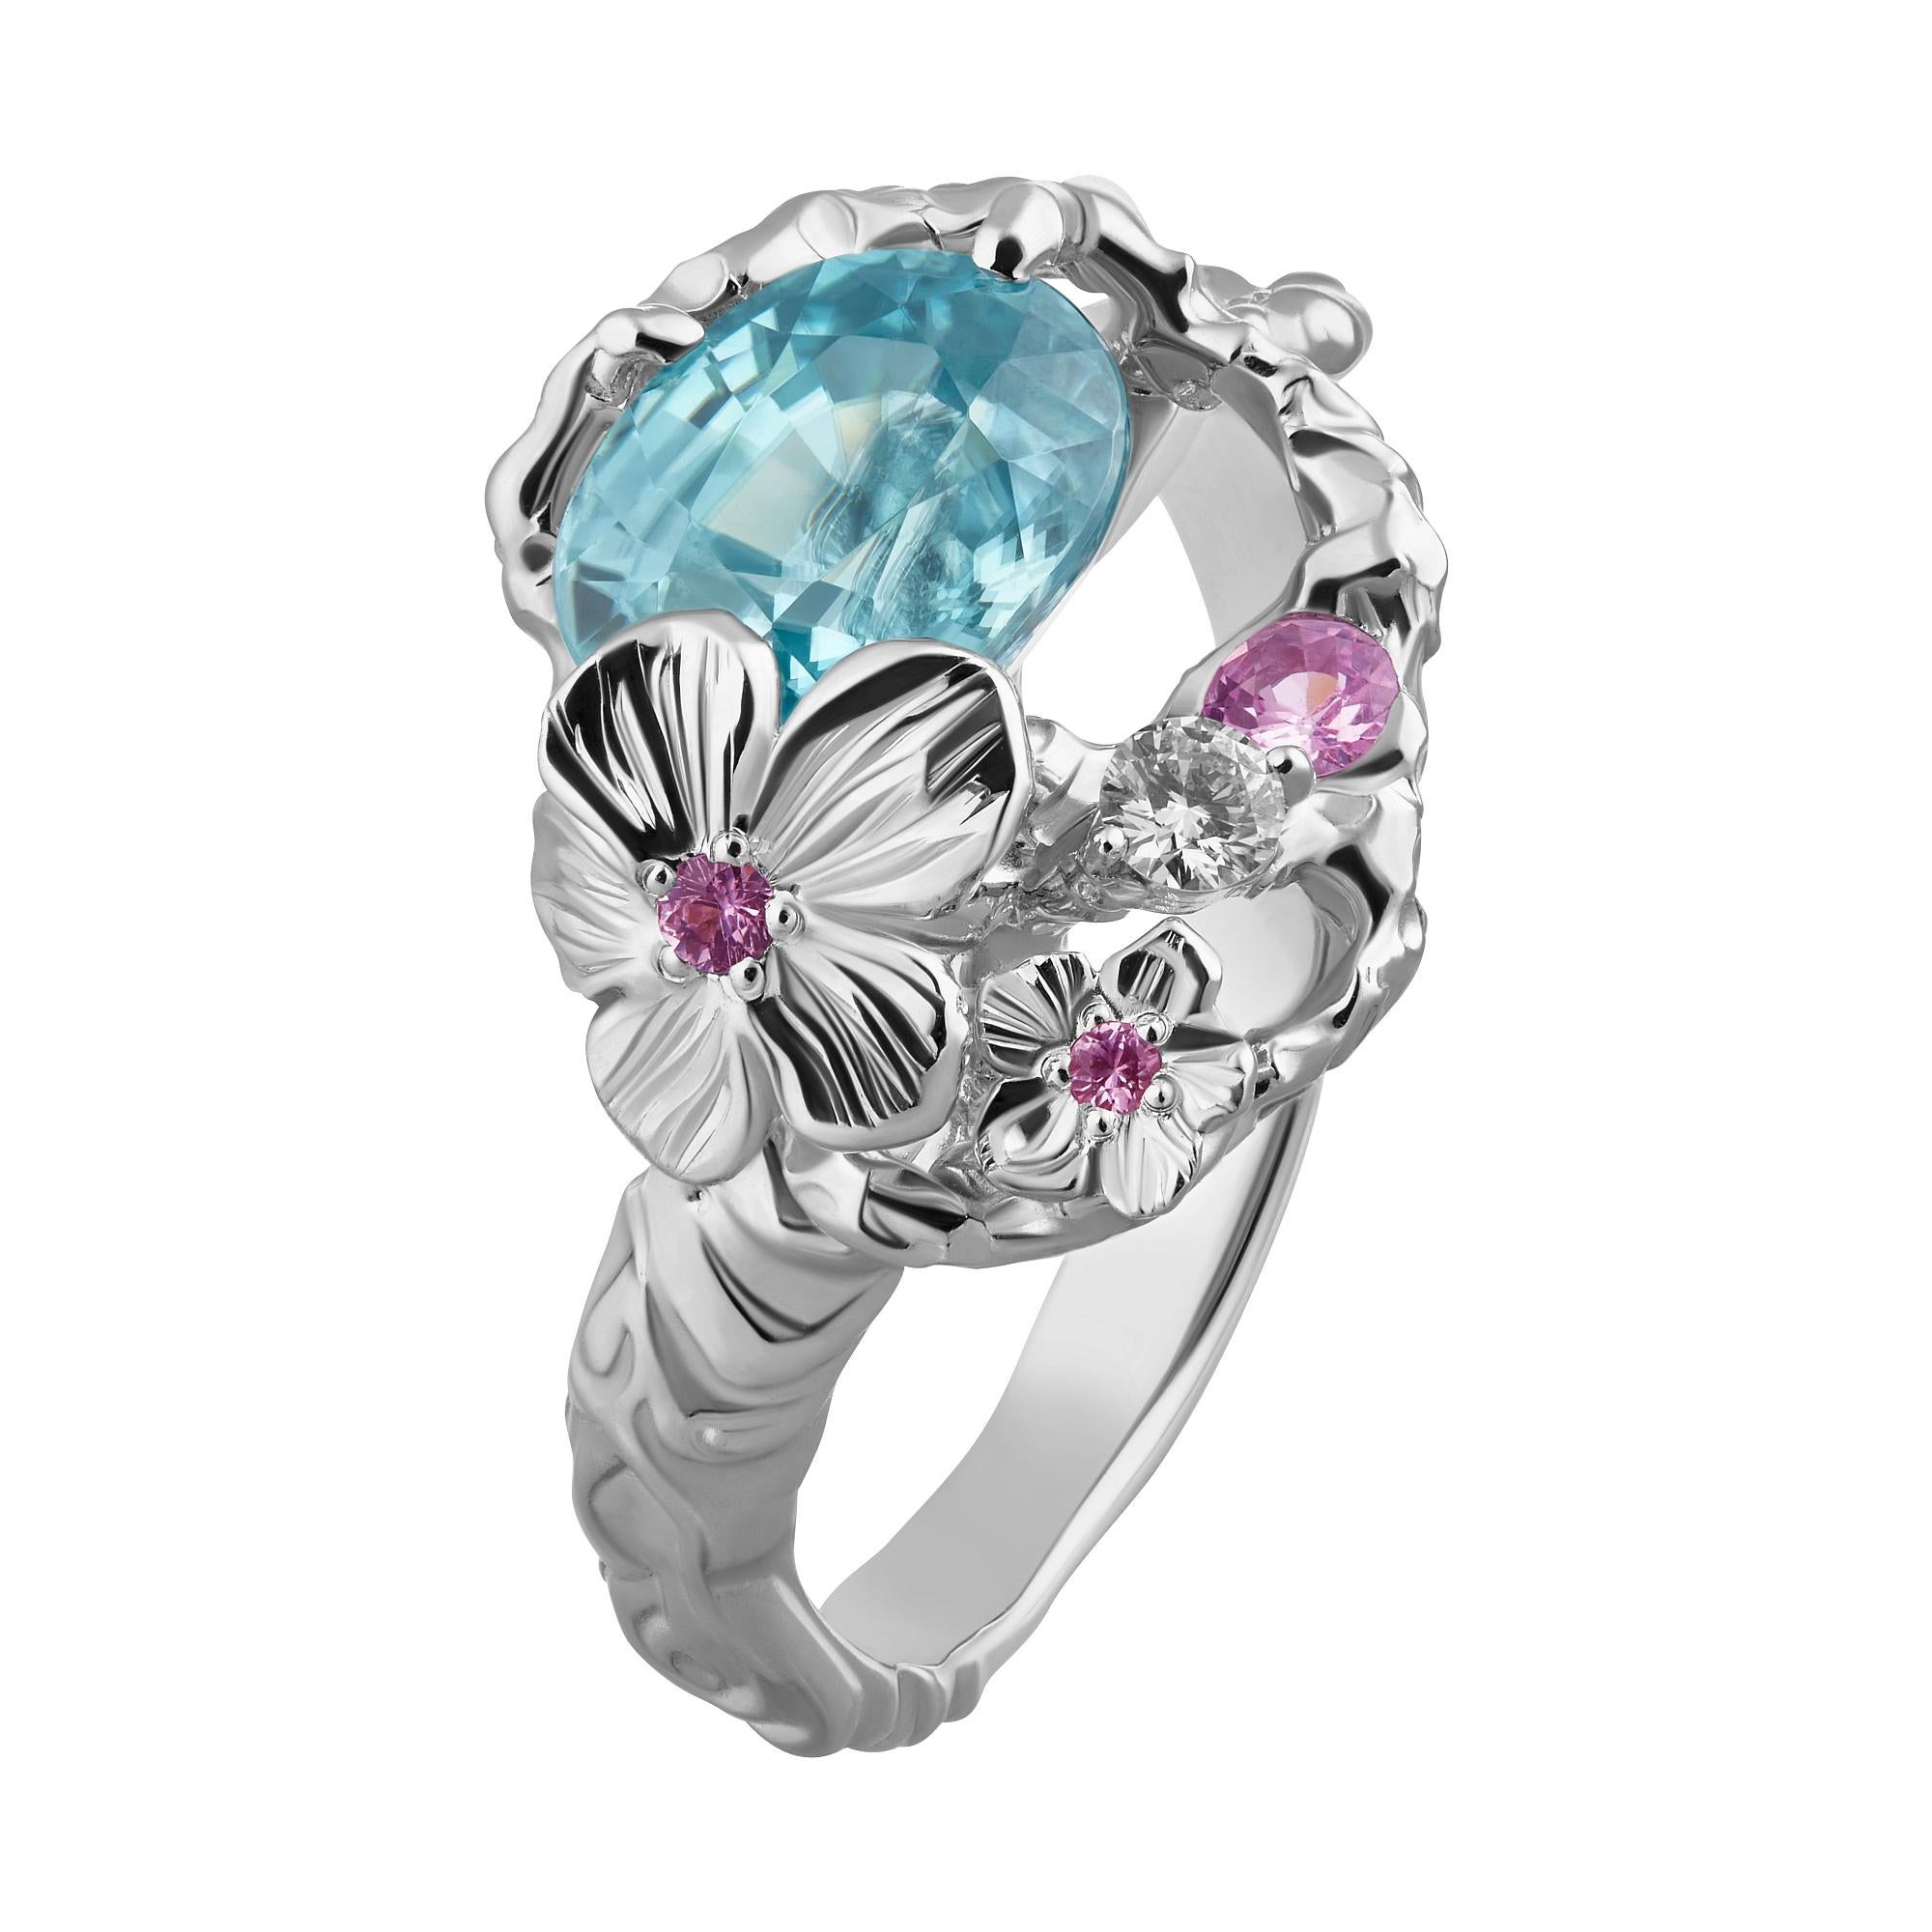 This handmade ring with a sky blue natural Zircon, dazzling diamonds, and fashionable rose colour sapphires from MOISEIKIN🄬 reminds you of the pagoda blue sky and the tale of Snow Queen. Or one may think of the ocean. The blue Zircon with flawless